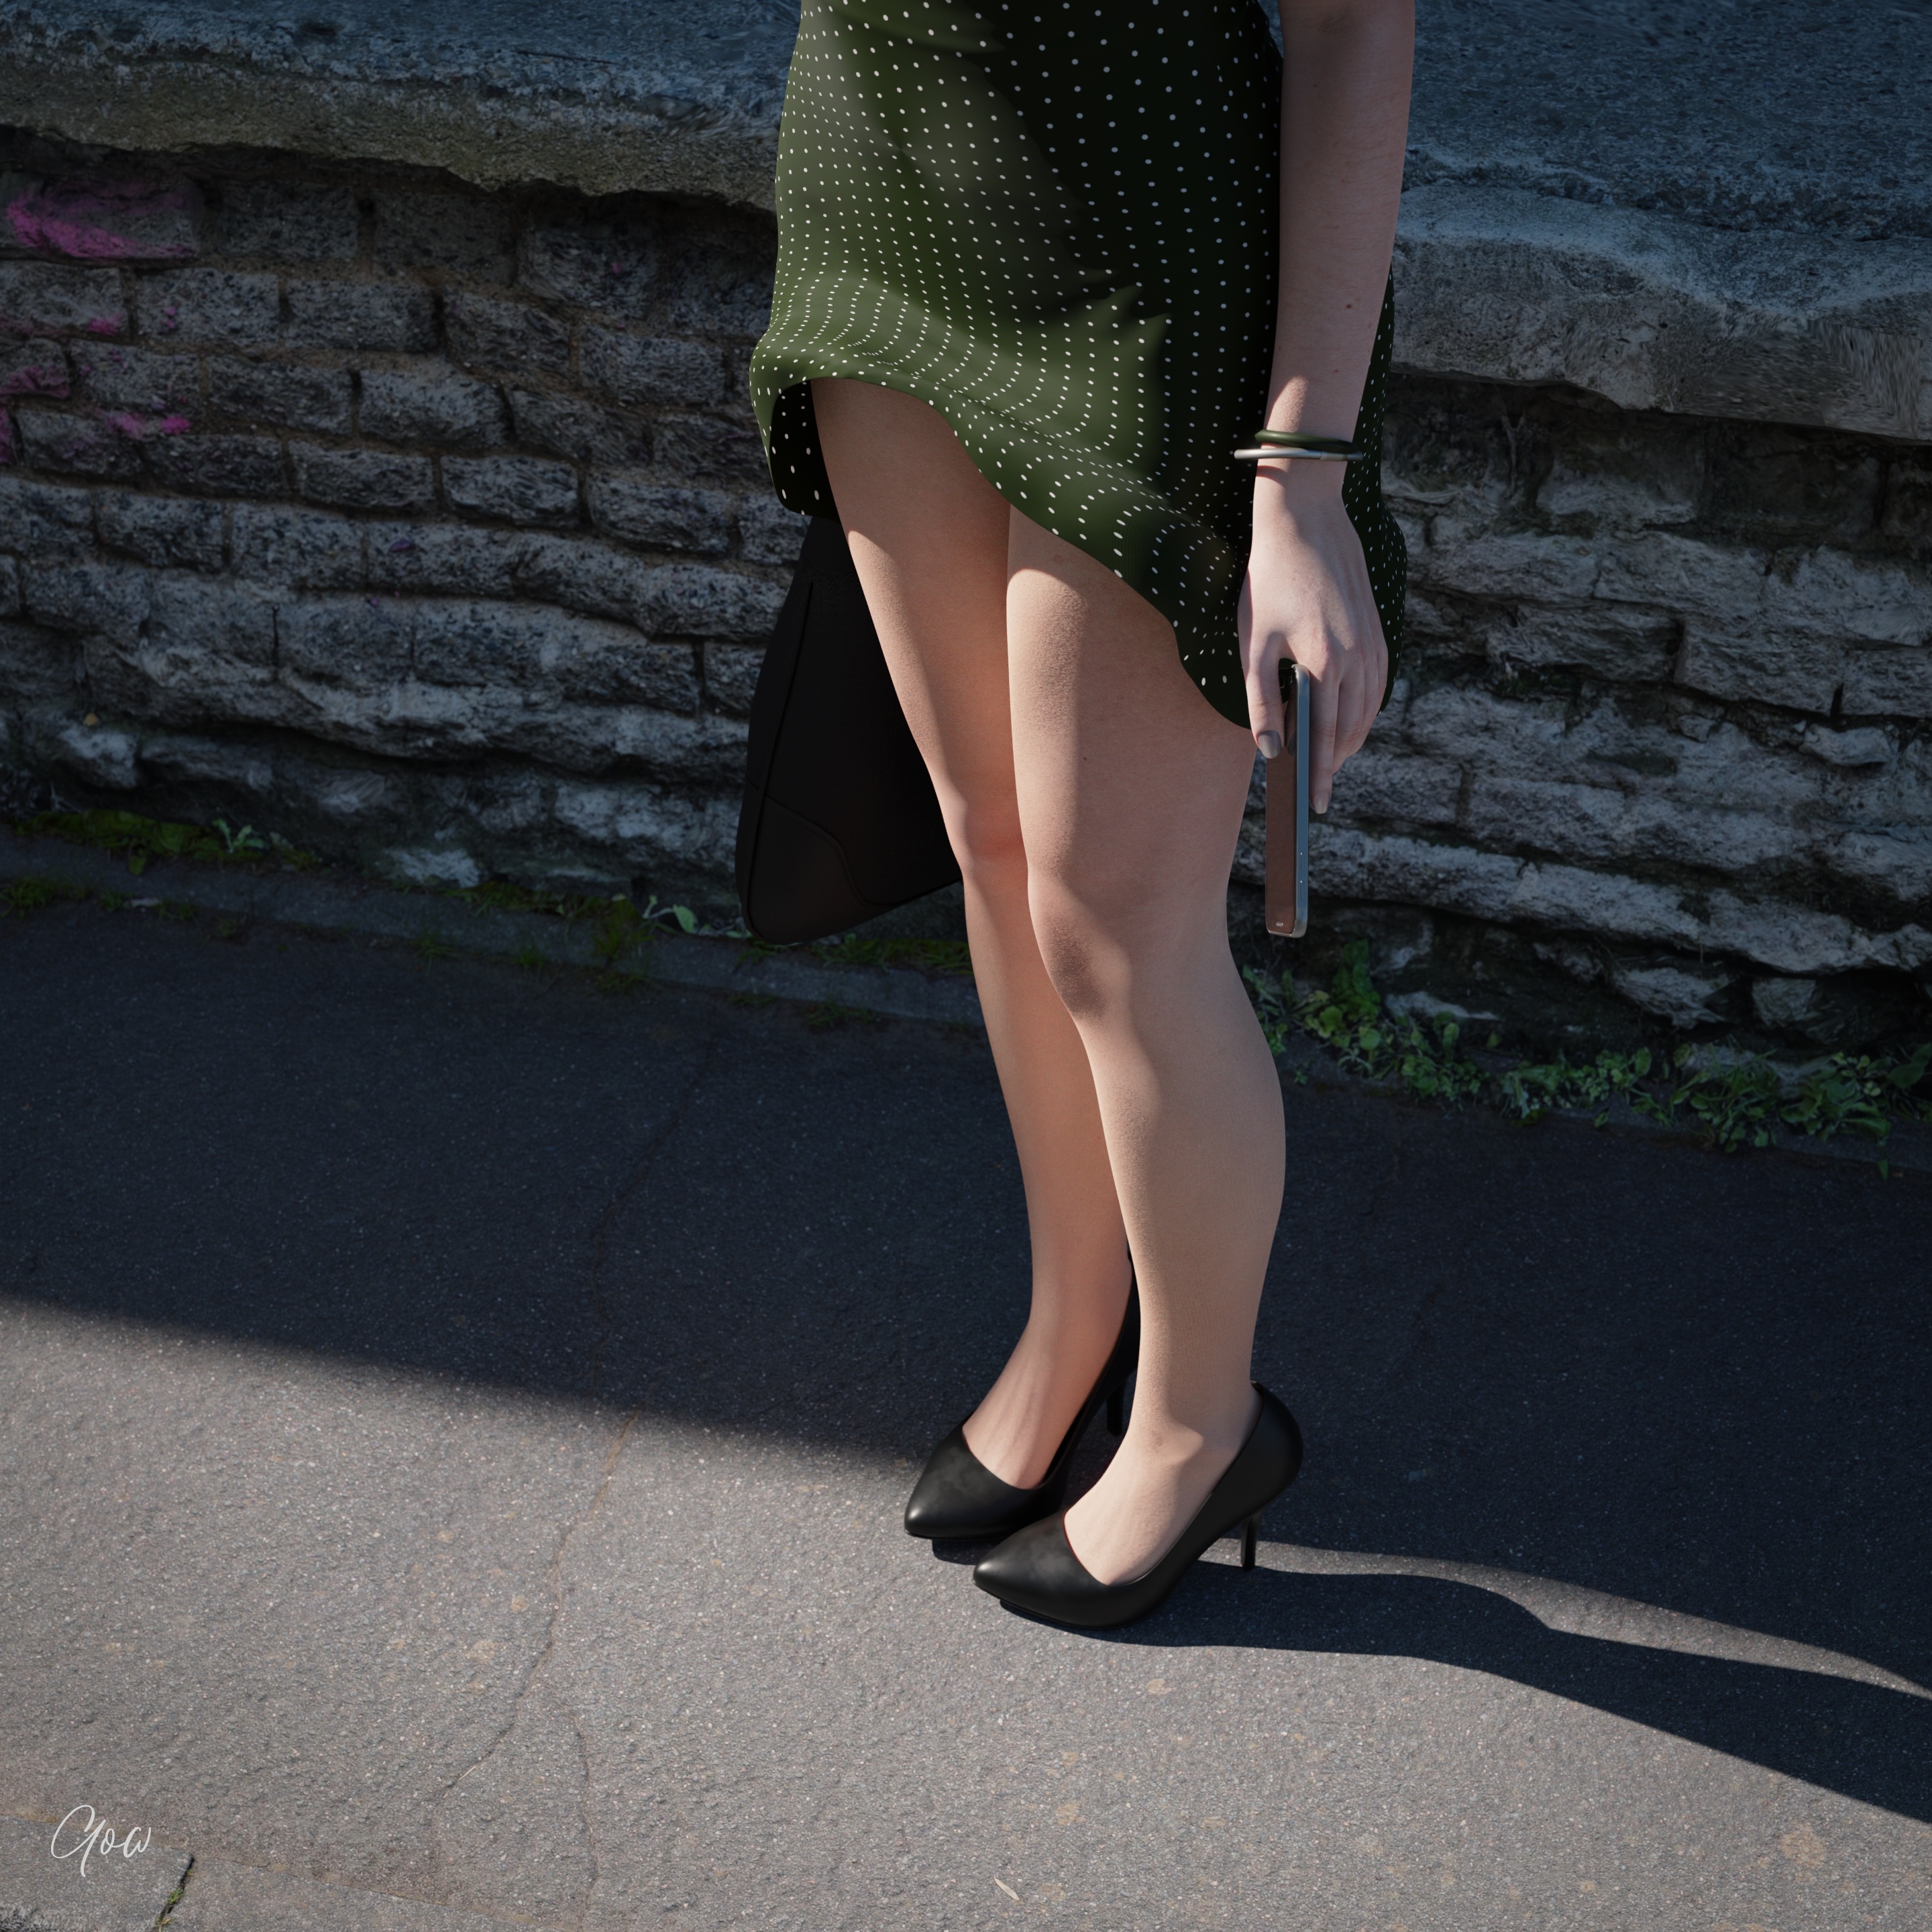 Dotted green and the wind - PT1 White Outdoor Lady Secretary Photoshoot Clothed Skirt Upskirt Pussy Wet Pussy Legs Sexy Sexyhot Photorealistic No Panties High Heels Hairy Pussy Party Dress Milf Natural Boobs Natural Tits 6